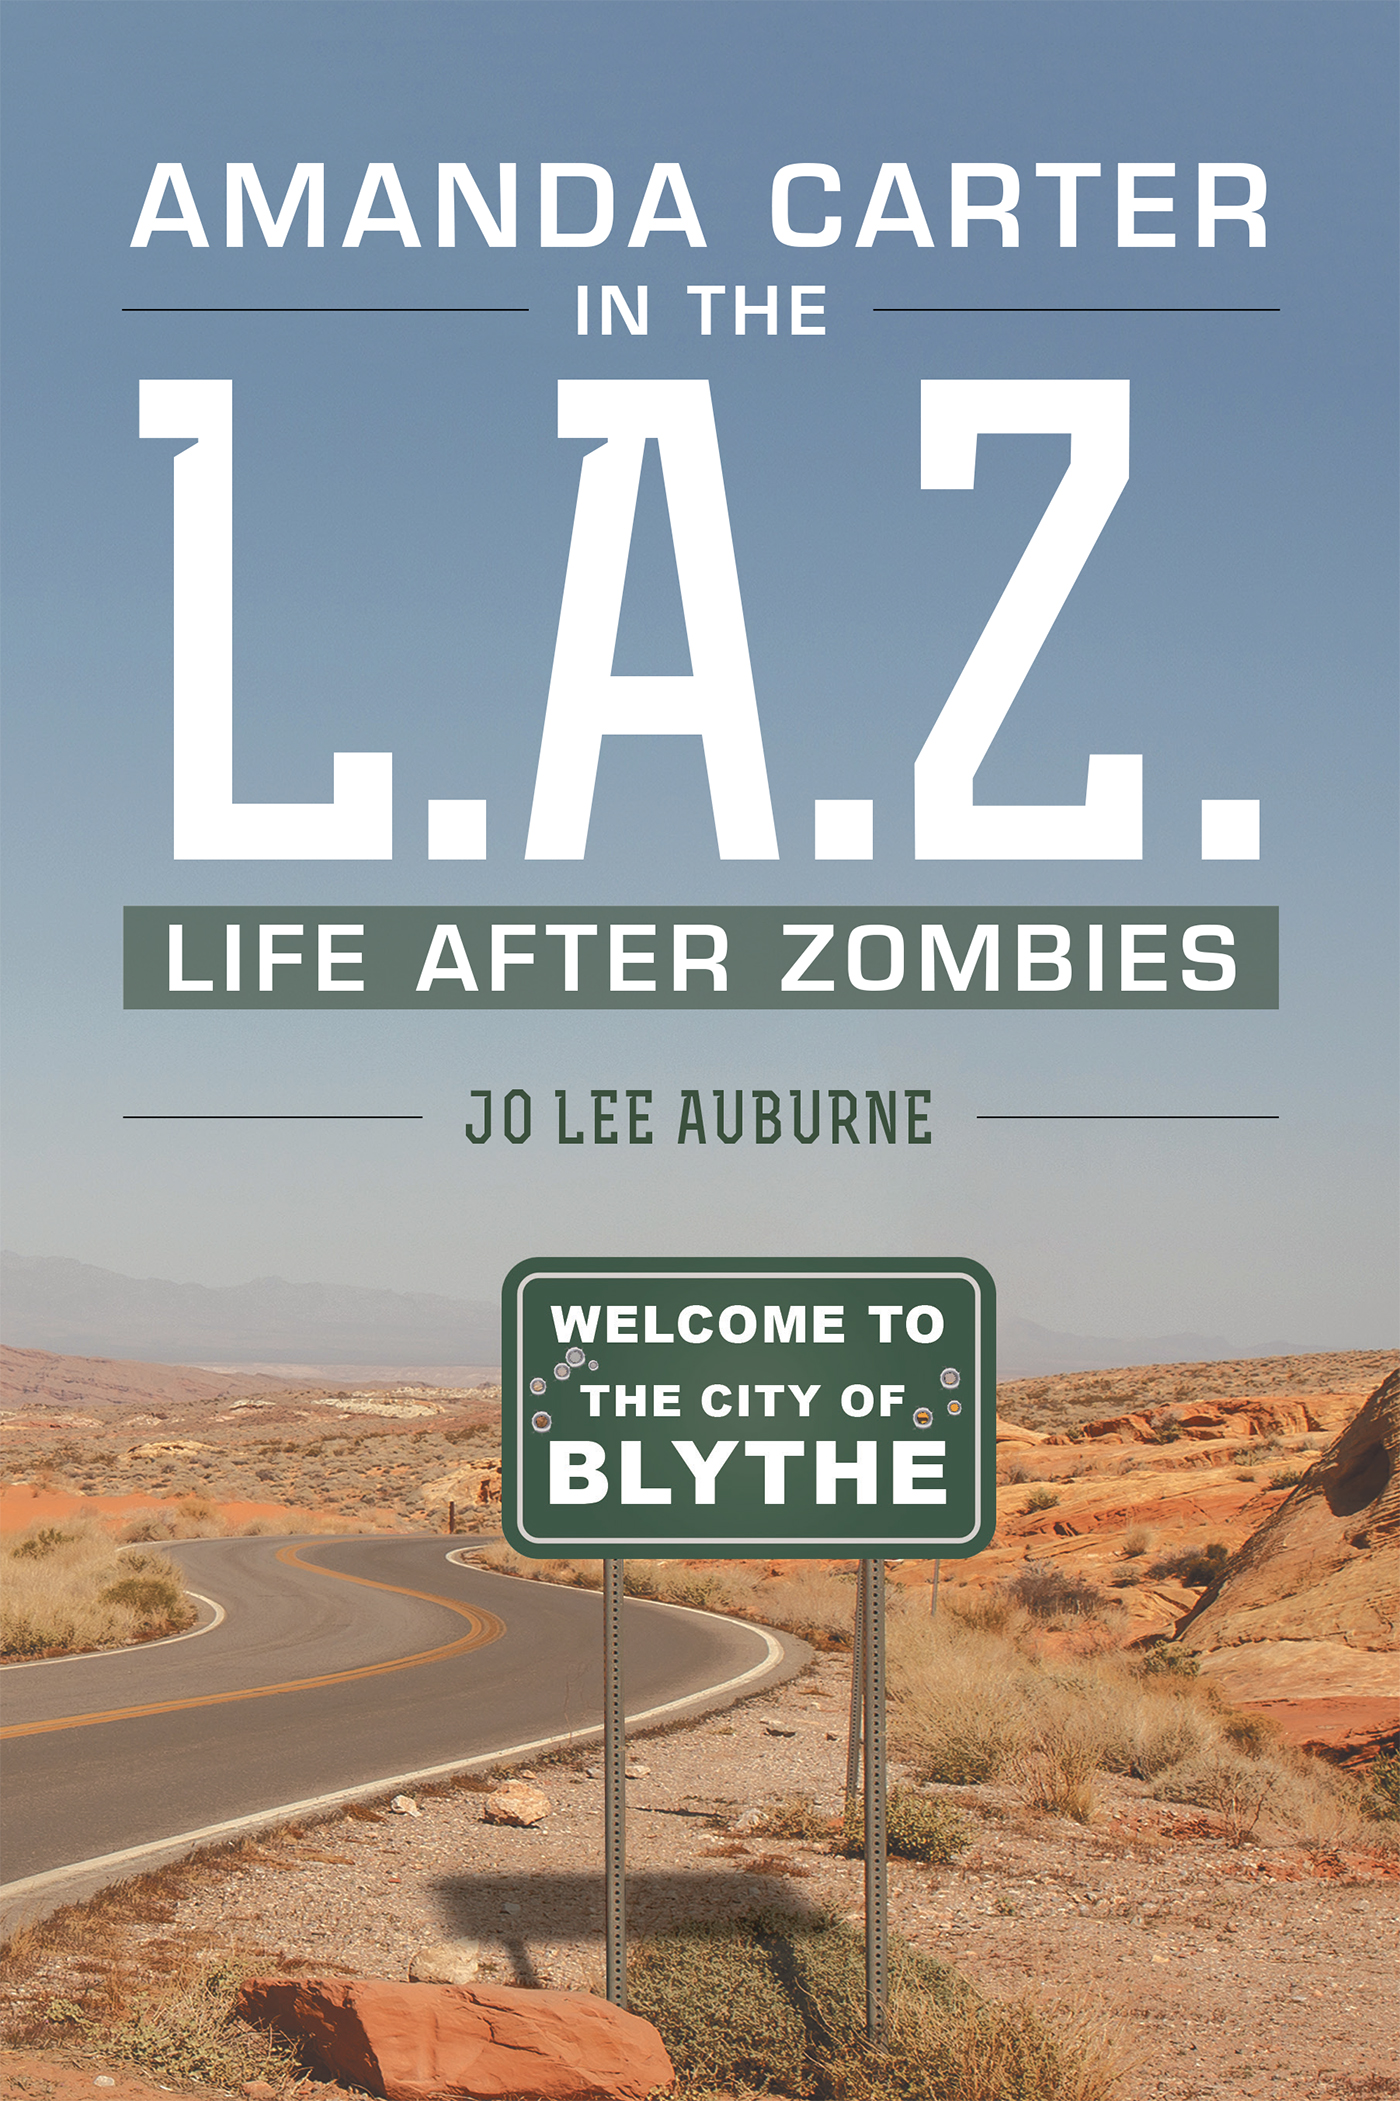 Amanda Carter in the L.A.Z., (Life After Zombies) Cover Image